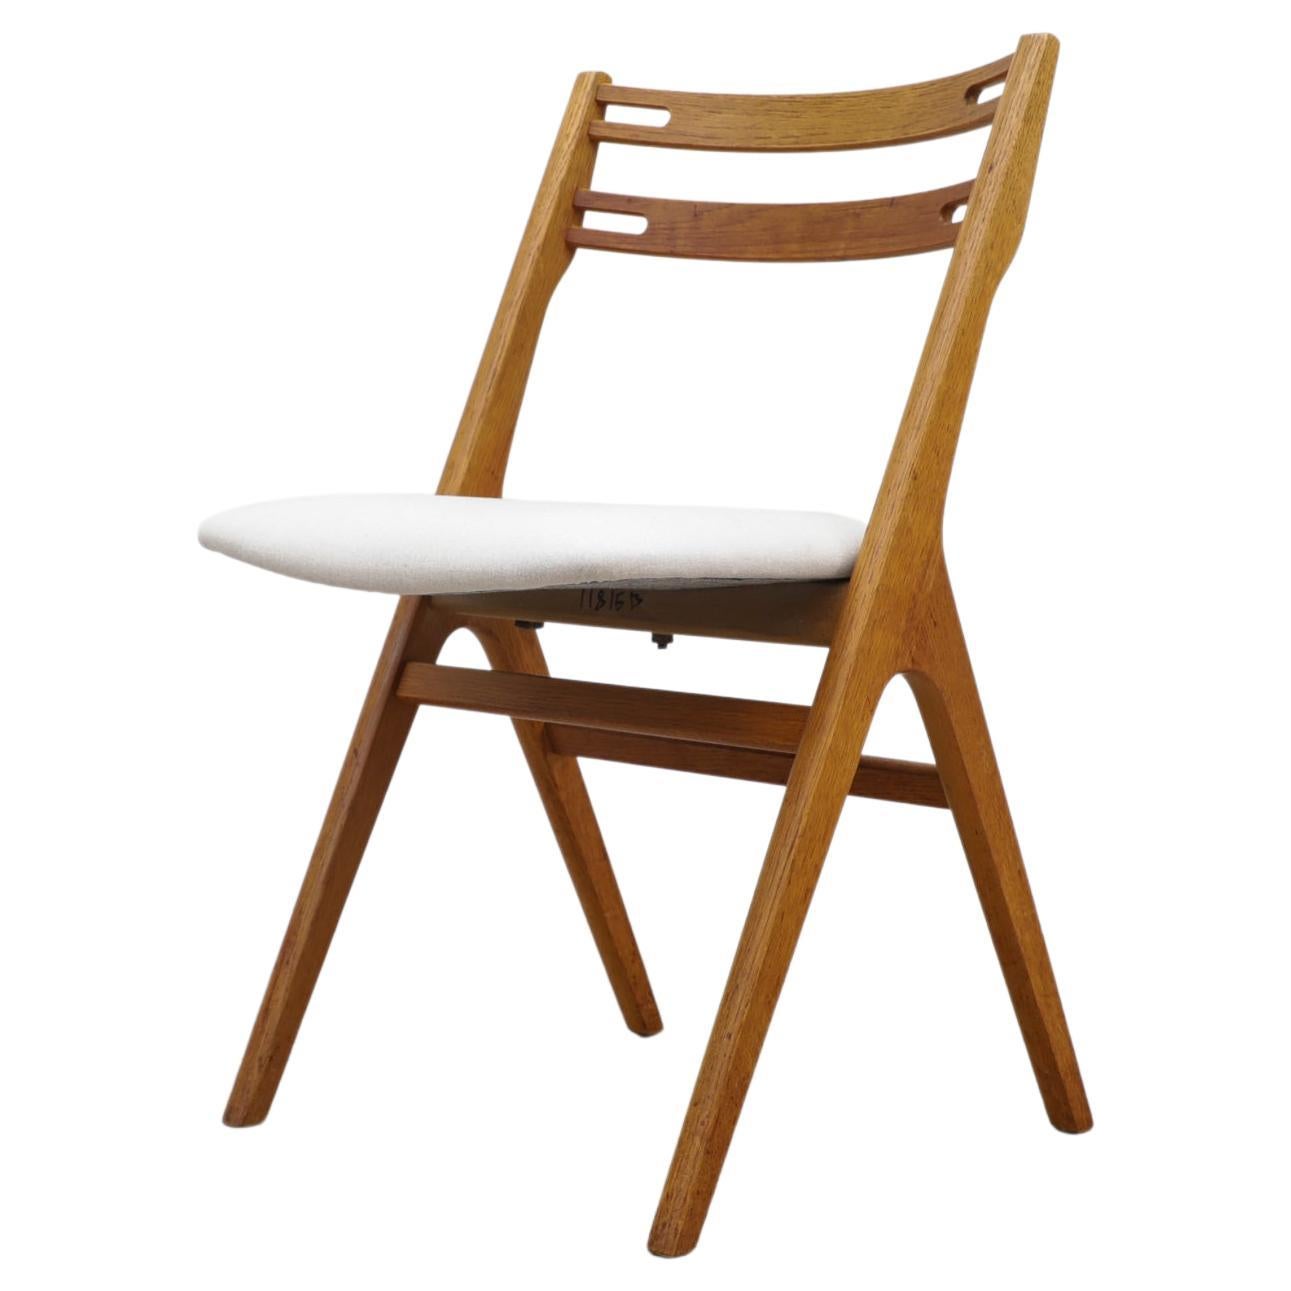 Single Hans Wegner Inspired Oak Dining Chair with Compass Legs and Bowed Back